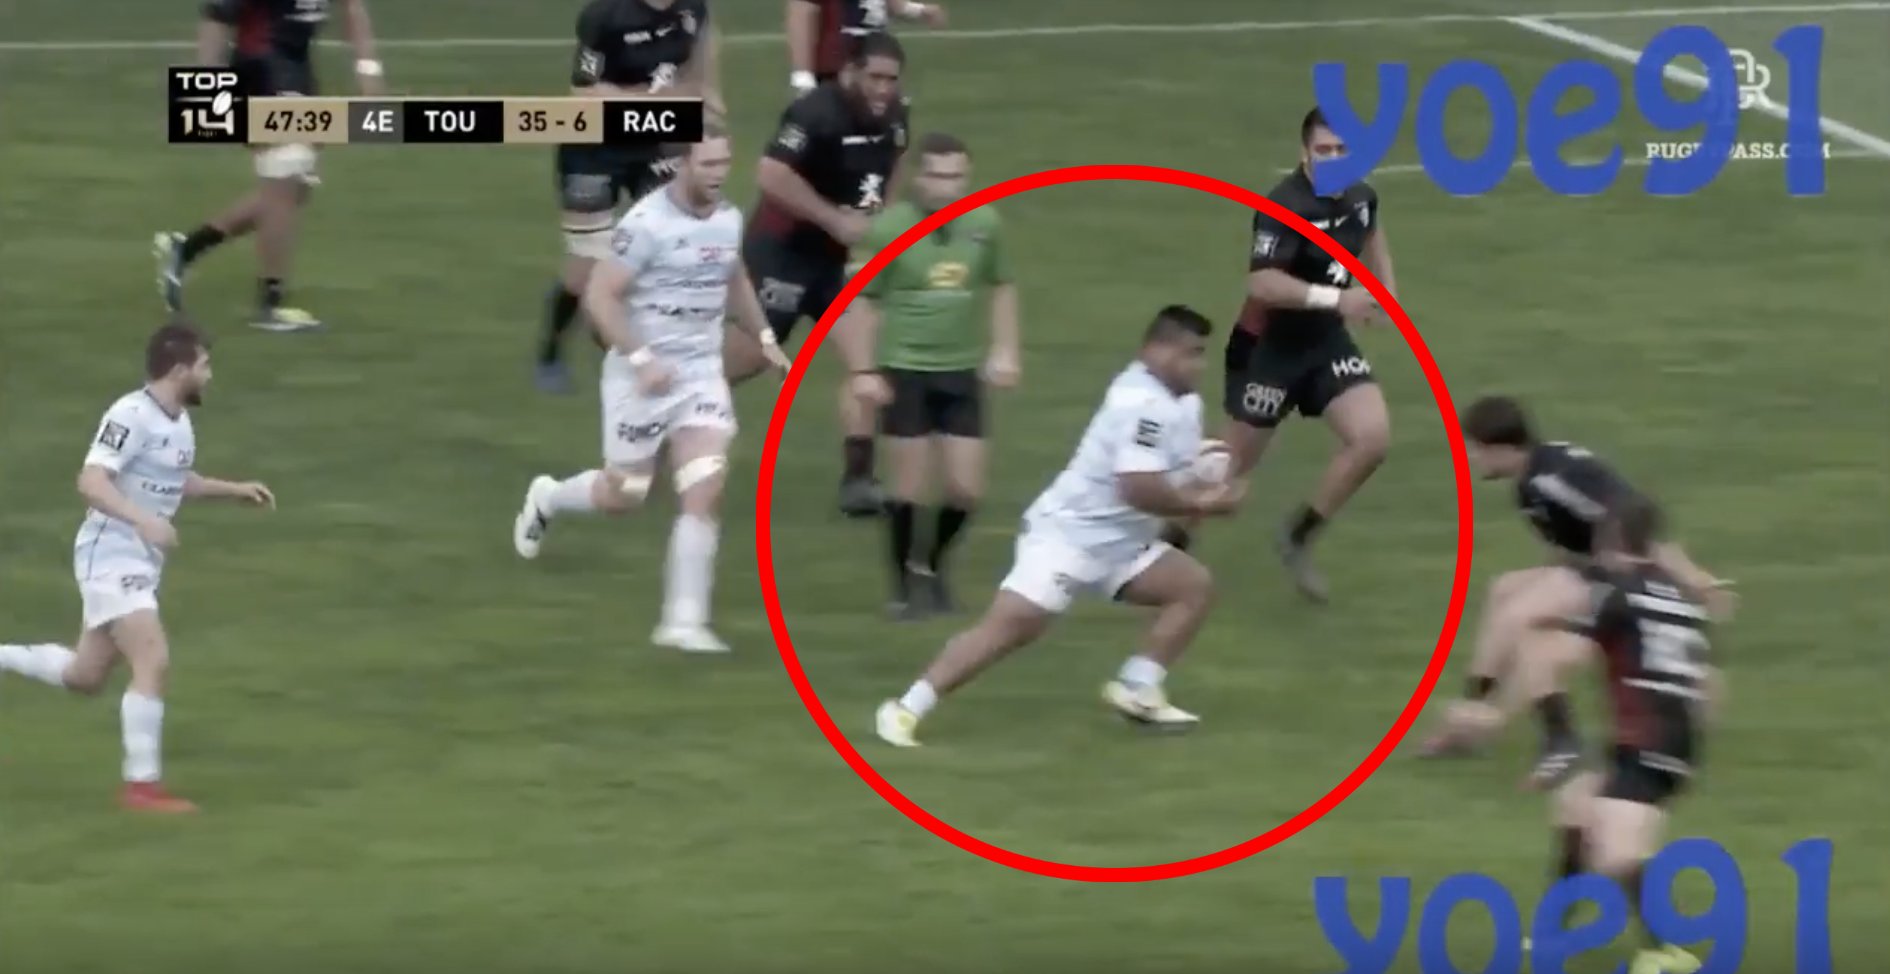 WATCH: 125kg Samoan cannonball has been turning French fancies into mince meat in Top 14